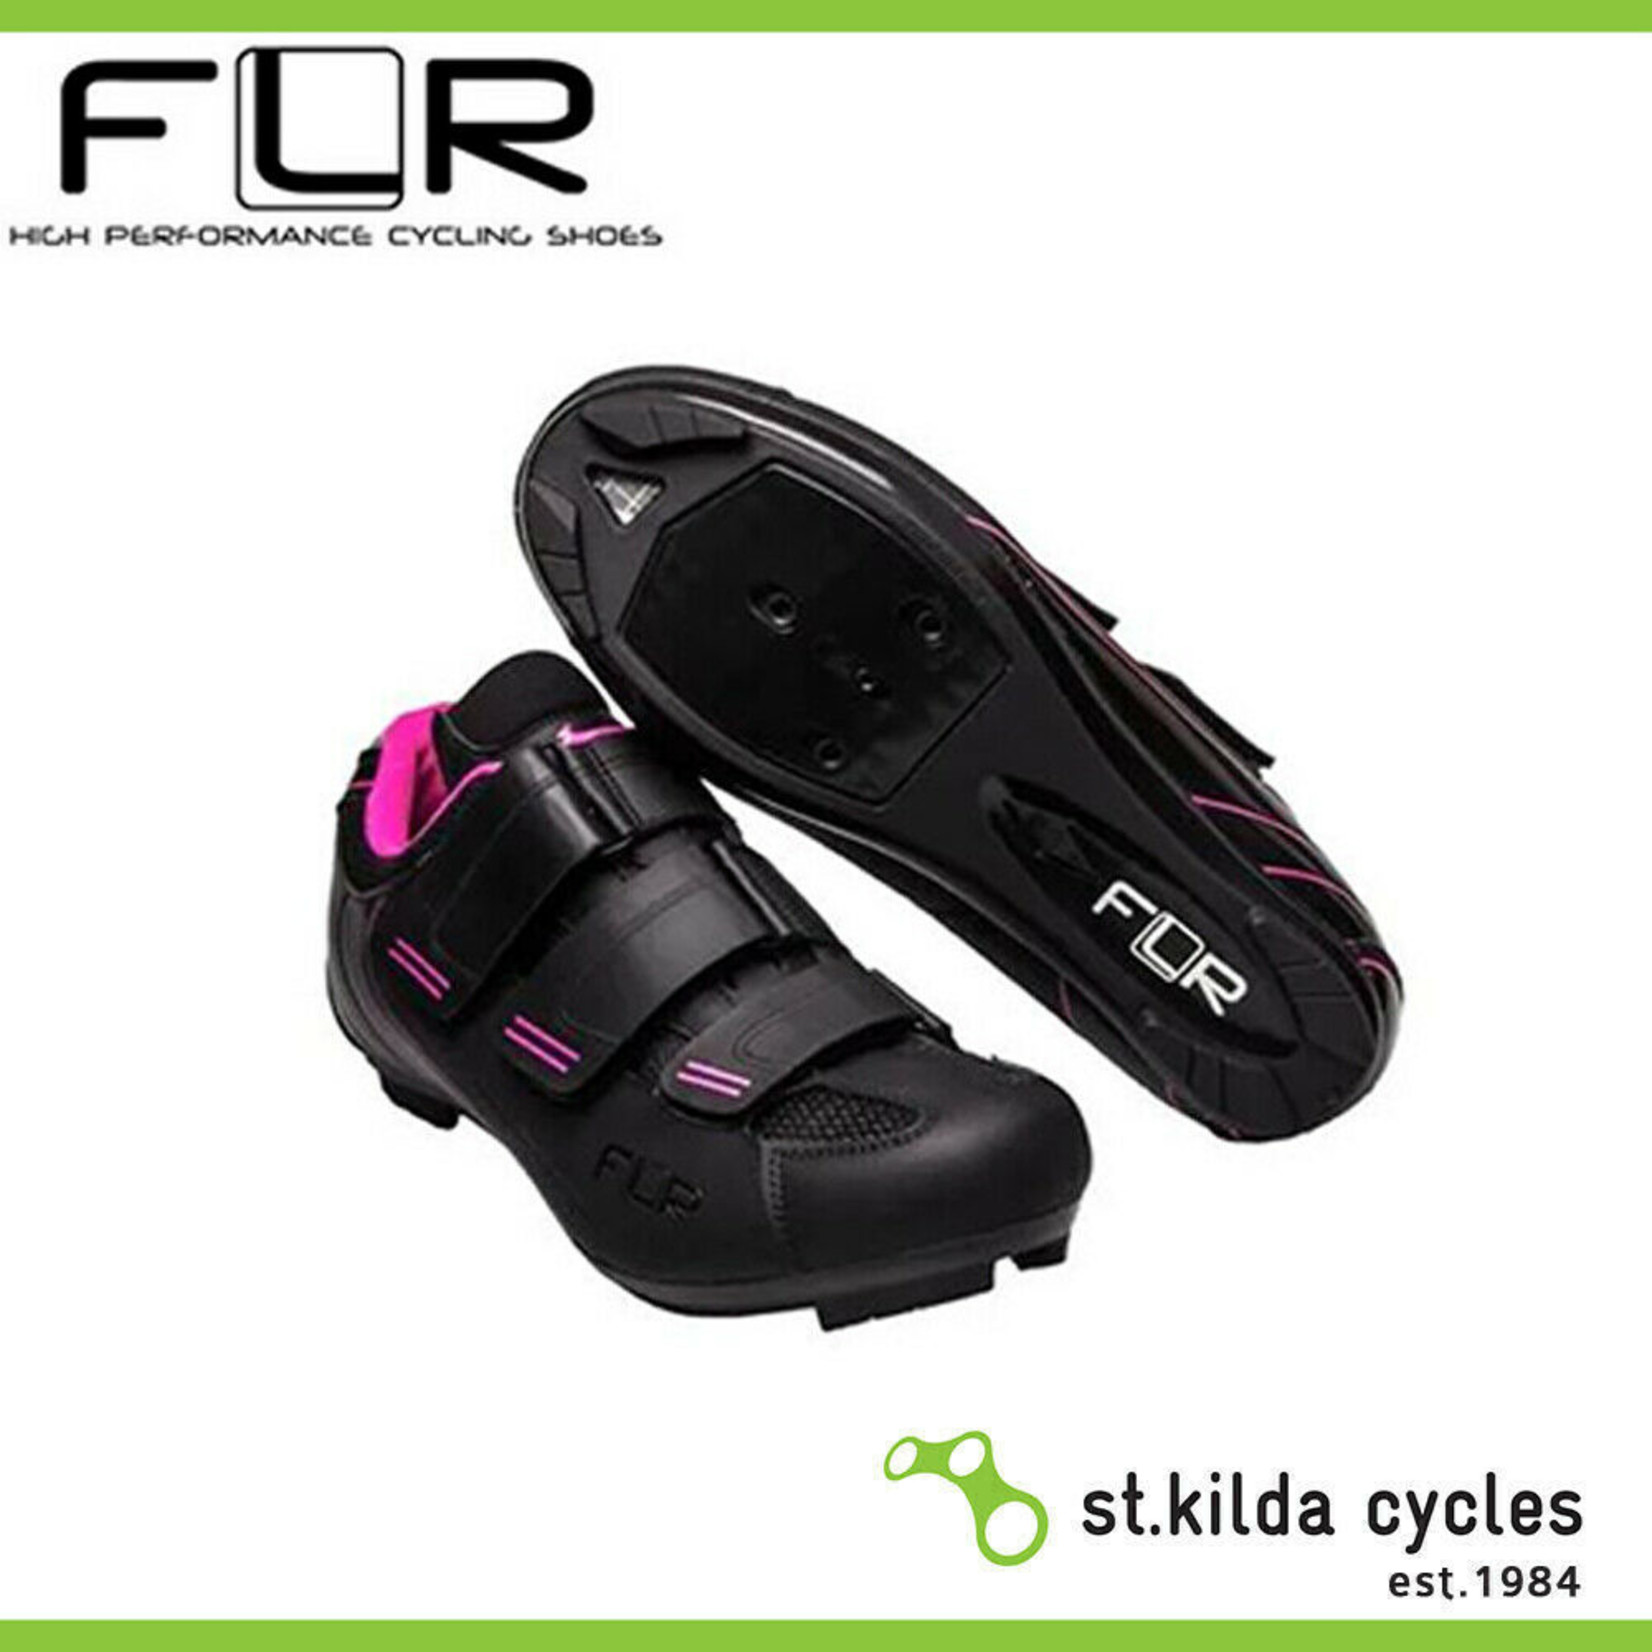 FLR FLR F-35-III Pro Road Shoes - R250 Outsole - Laces - Size 37 - Black - Pink